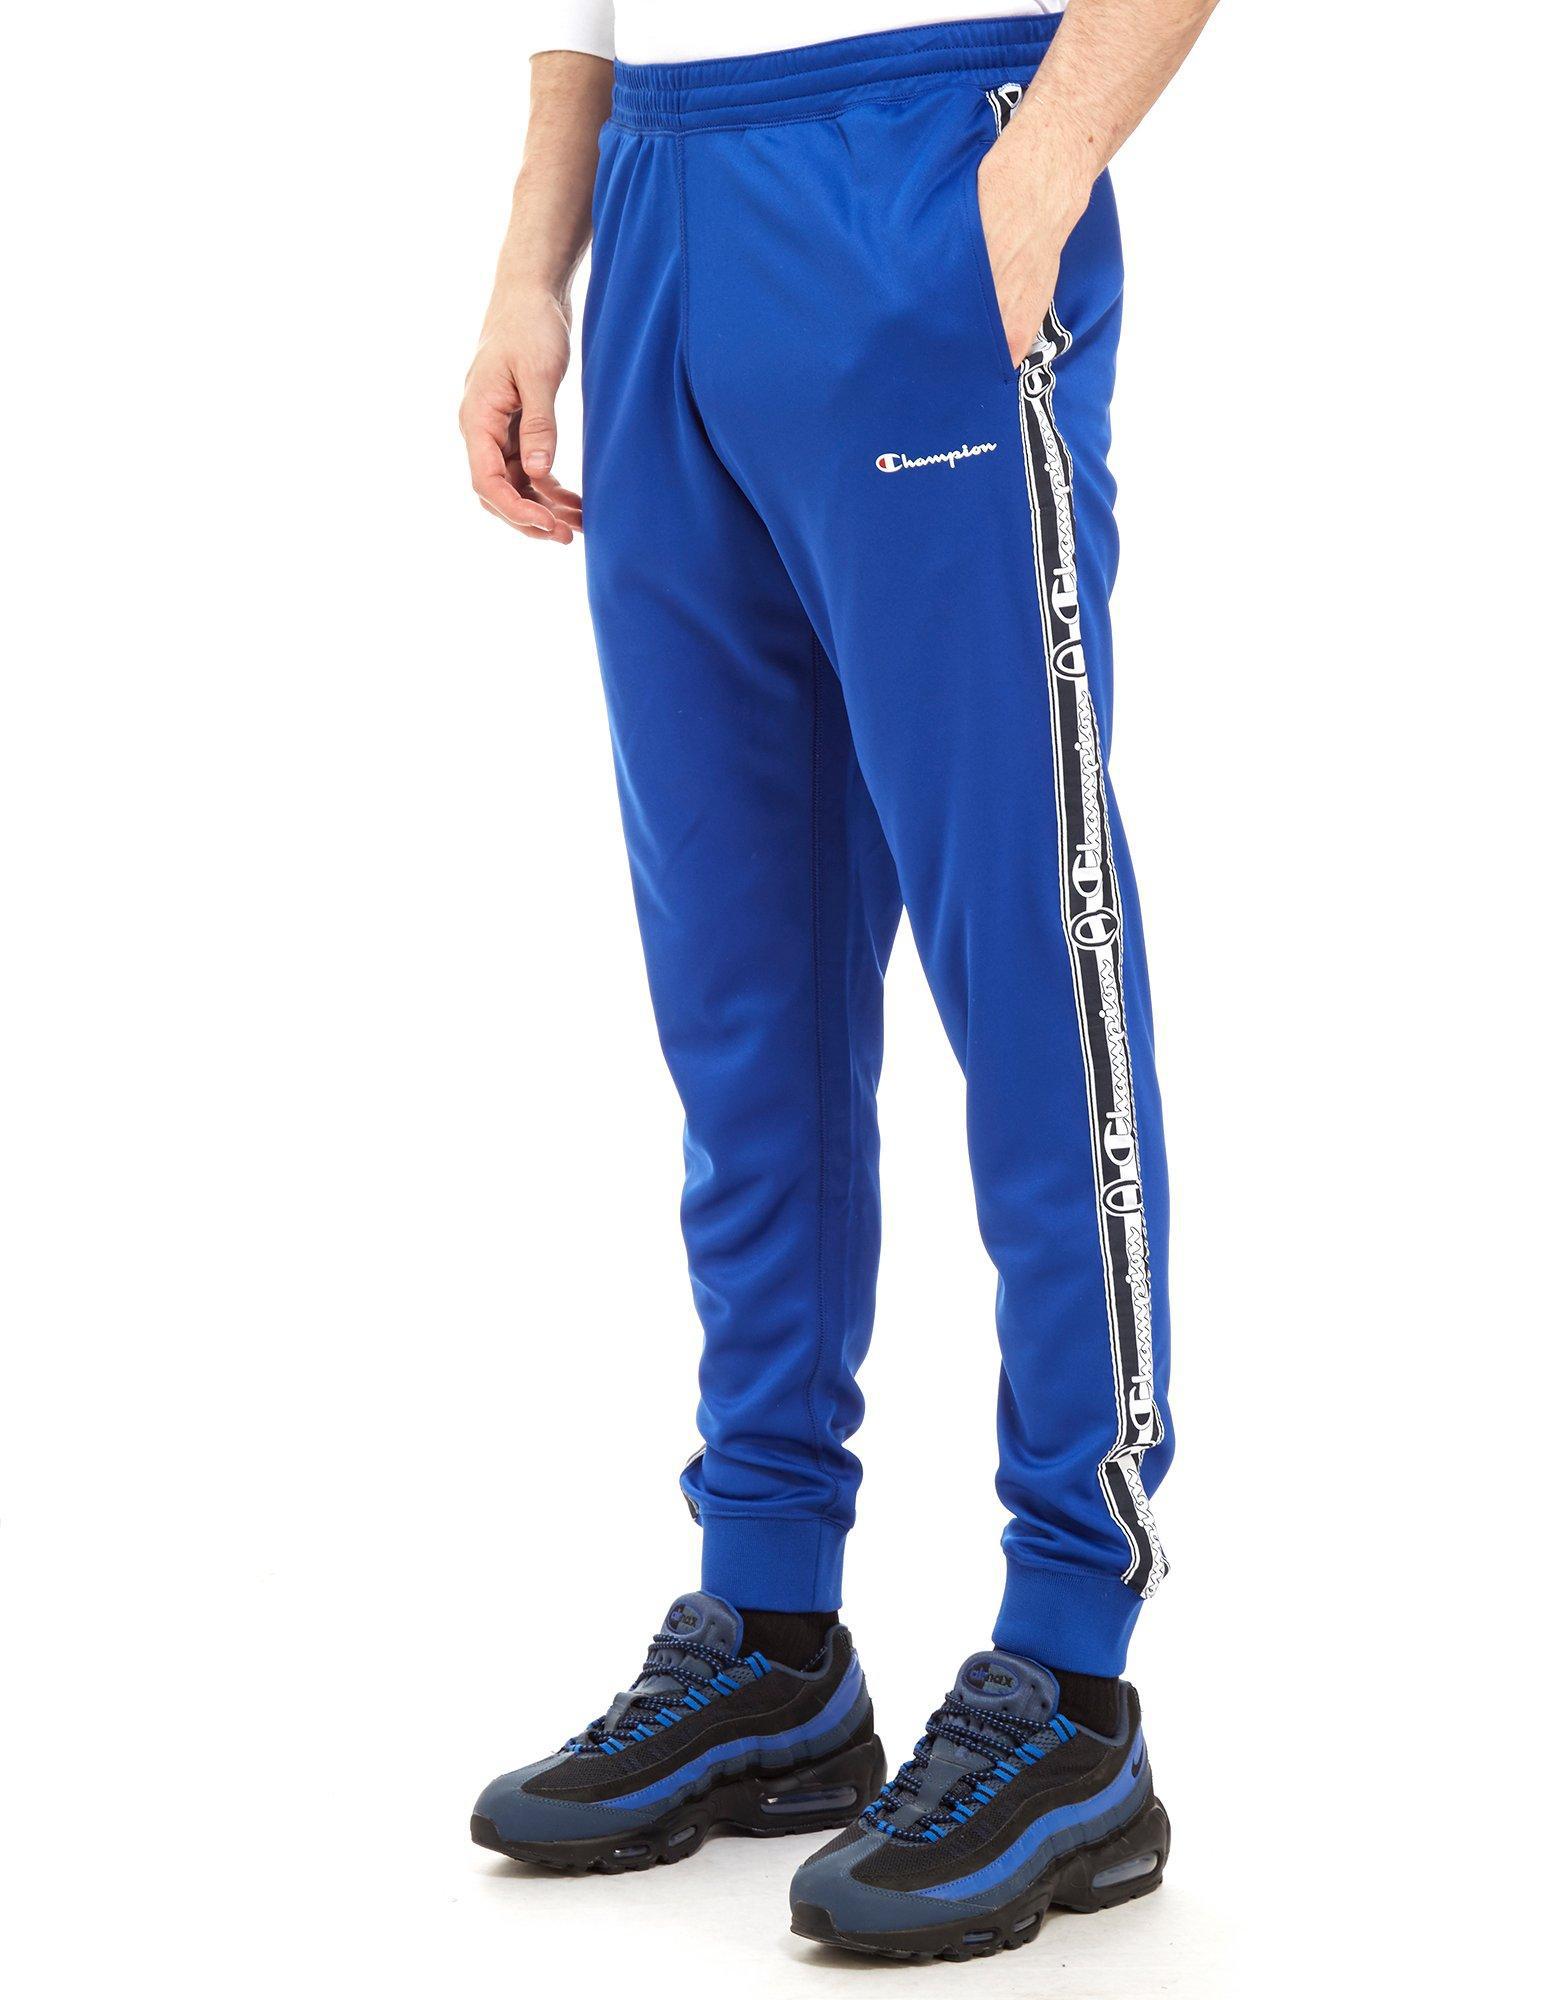 Champion Synthetic Taped Pants in Blue for Men - Lyst